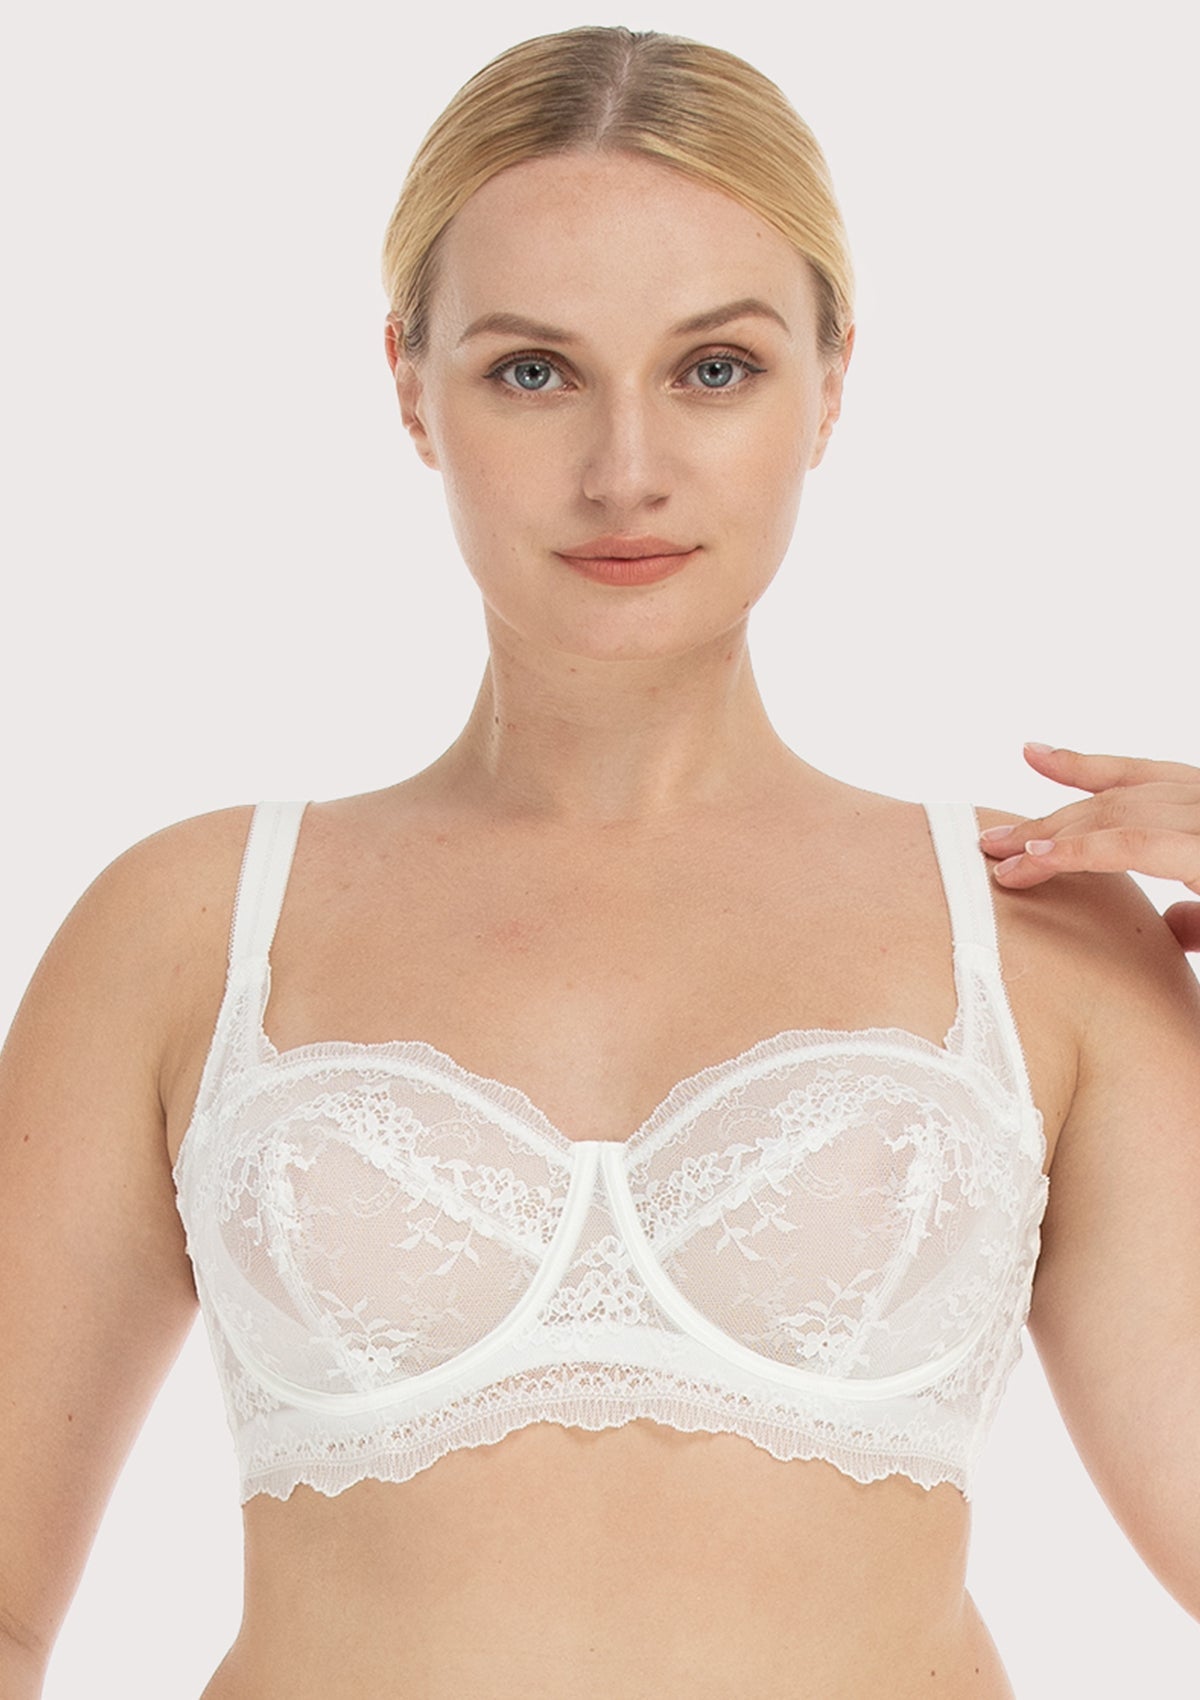 HSIA I Do Floral Lace Bridal Balconette Beautiful Bra For Special Day - Pink / 38 / DD/E